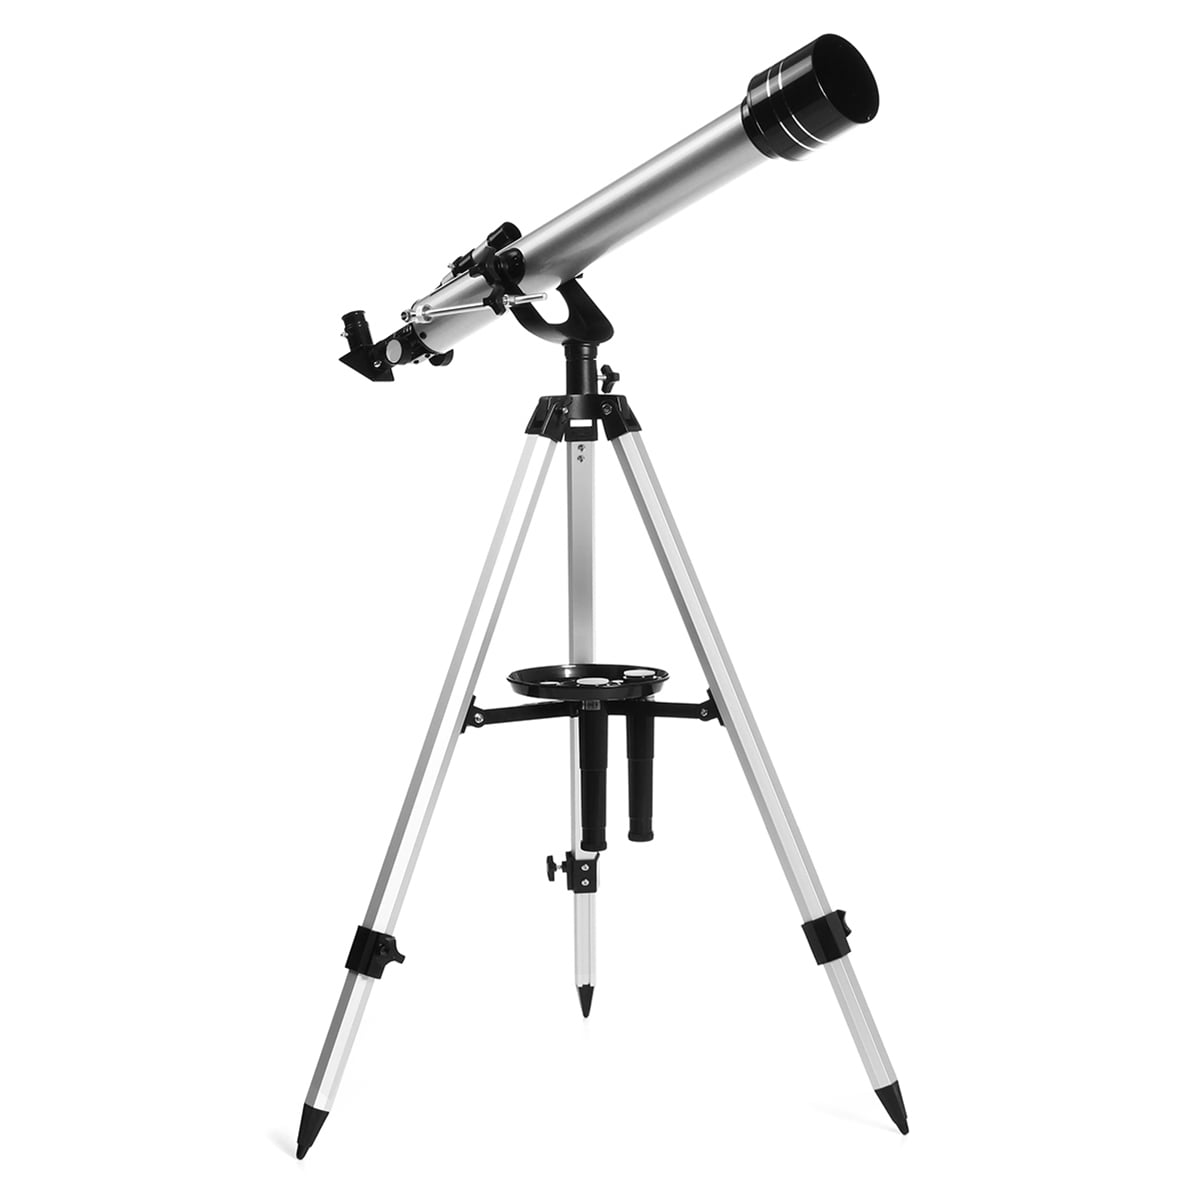 Portable Refractor Telescope with Adjustable Tripod Suitable for Children and Beginners to View The Sky Color : 80mm AZ, Size : Set C Astronomical Telescope YXCKG Telescopes for Adults